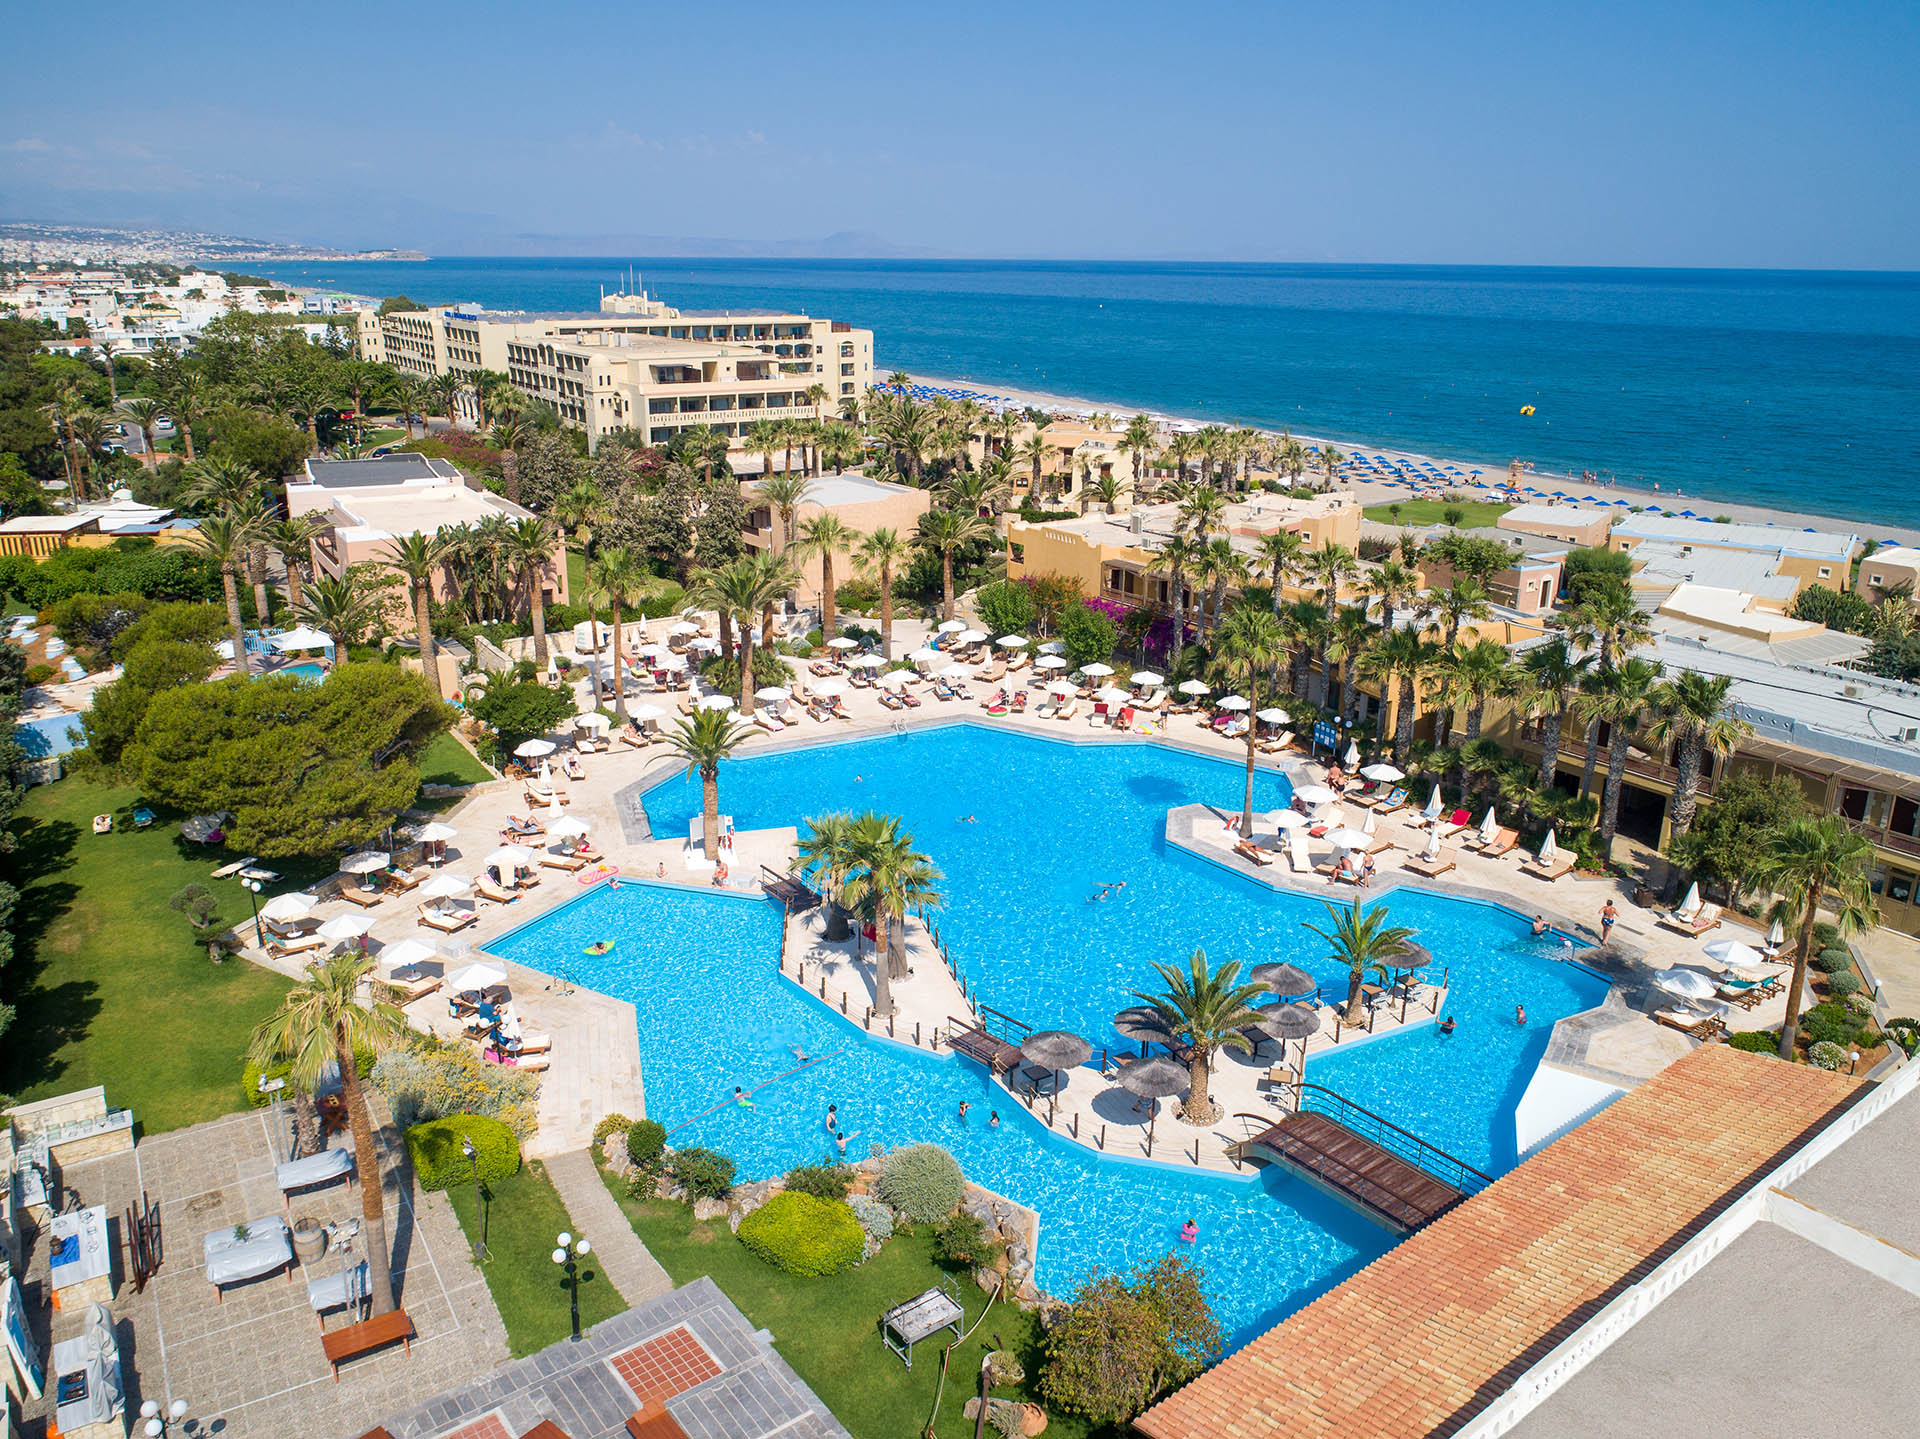 The most exciting Family Hotel in Crete